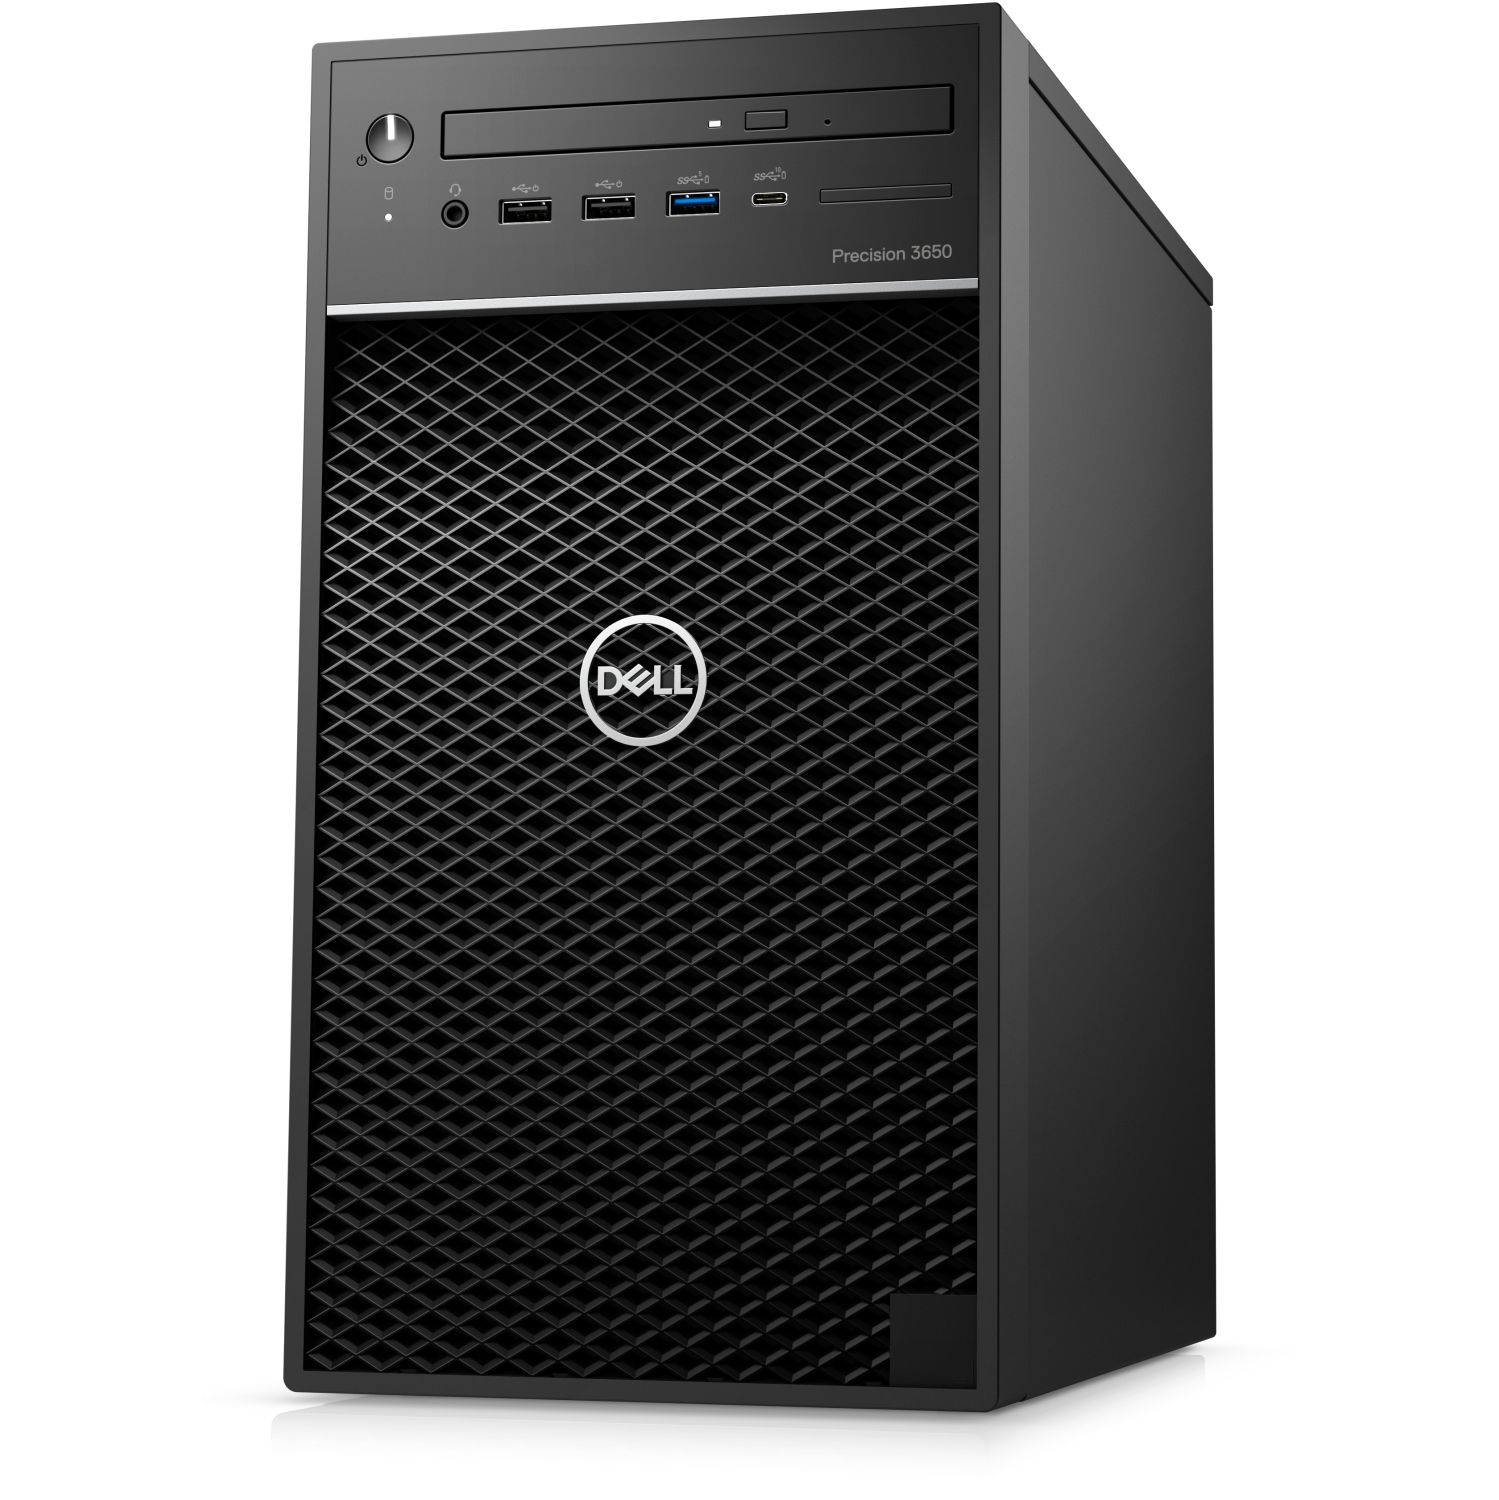 Refurbished (Excellent) - Dell Precision T3650 Workstation Desktop (2021), Core i9 - 1TB SSD - 32GB RAM - RTX 5000, 8 Cores @ 5.3 GHz - 11th Gen CPU Certified Refurbished